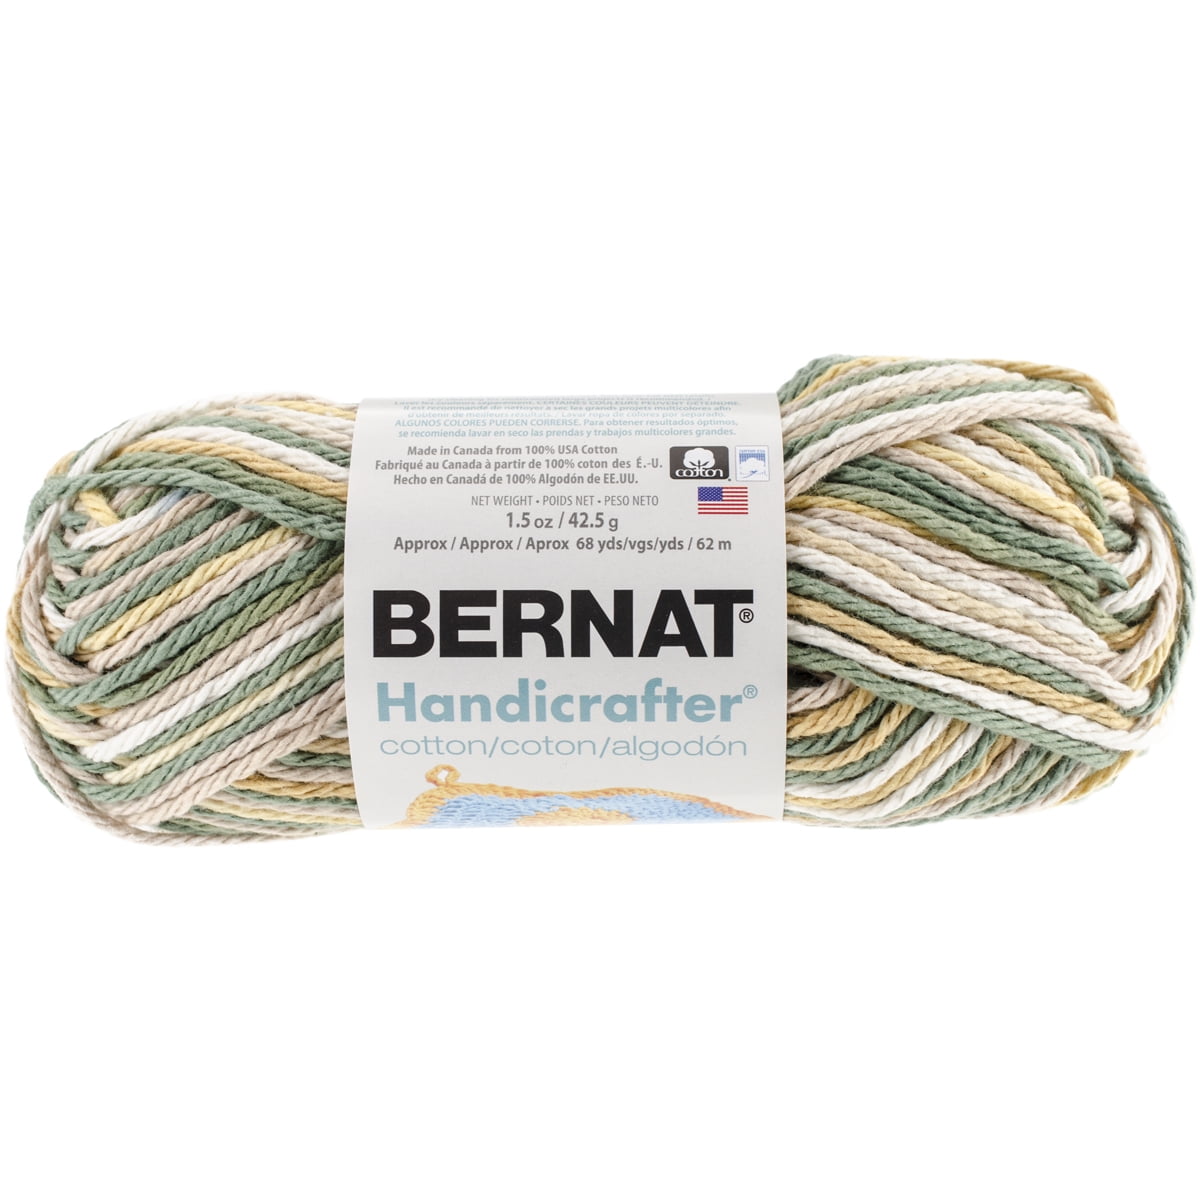 Bernat Handicrafter Cotton Yarn 340g - Ombres-Pretty Pastels, 1 count -  Fred Meyer